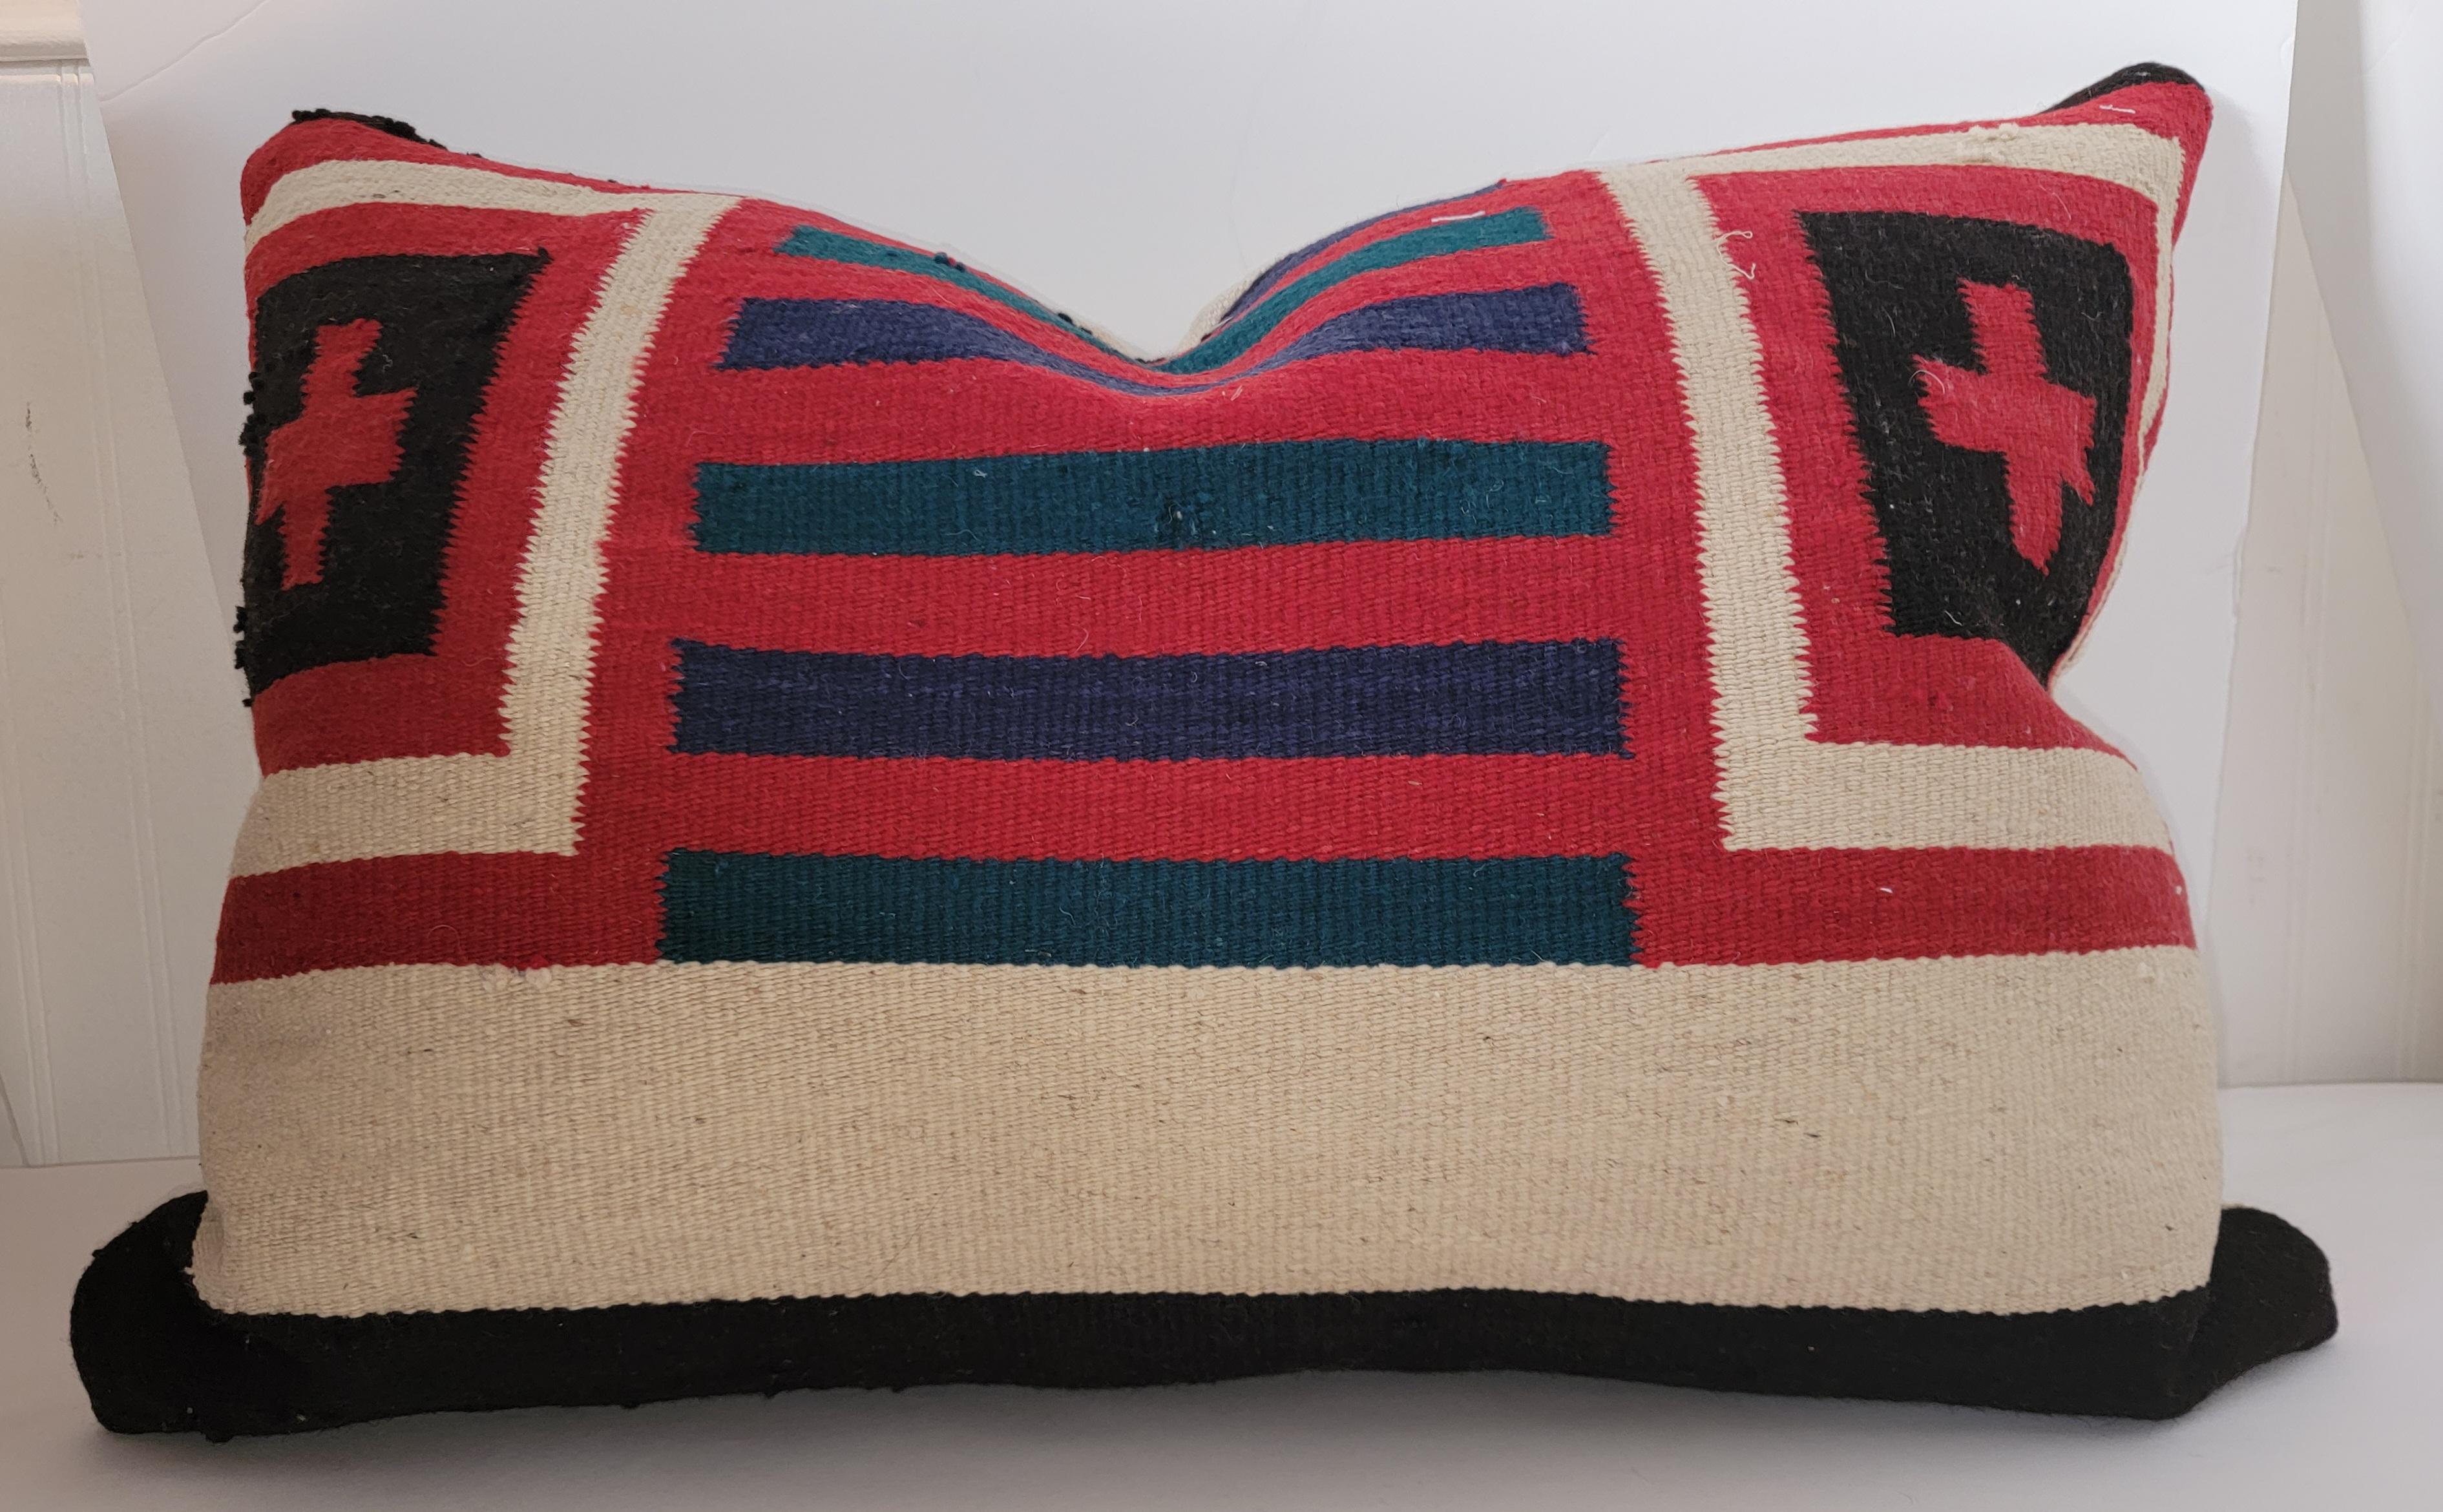 Hand-Woven Indian Weaving Pillow with Crosses